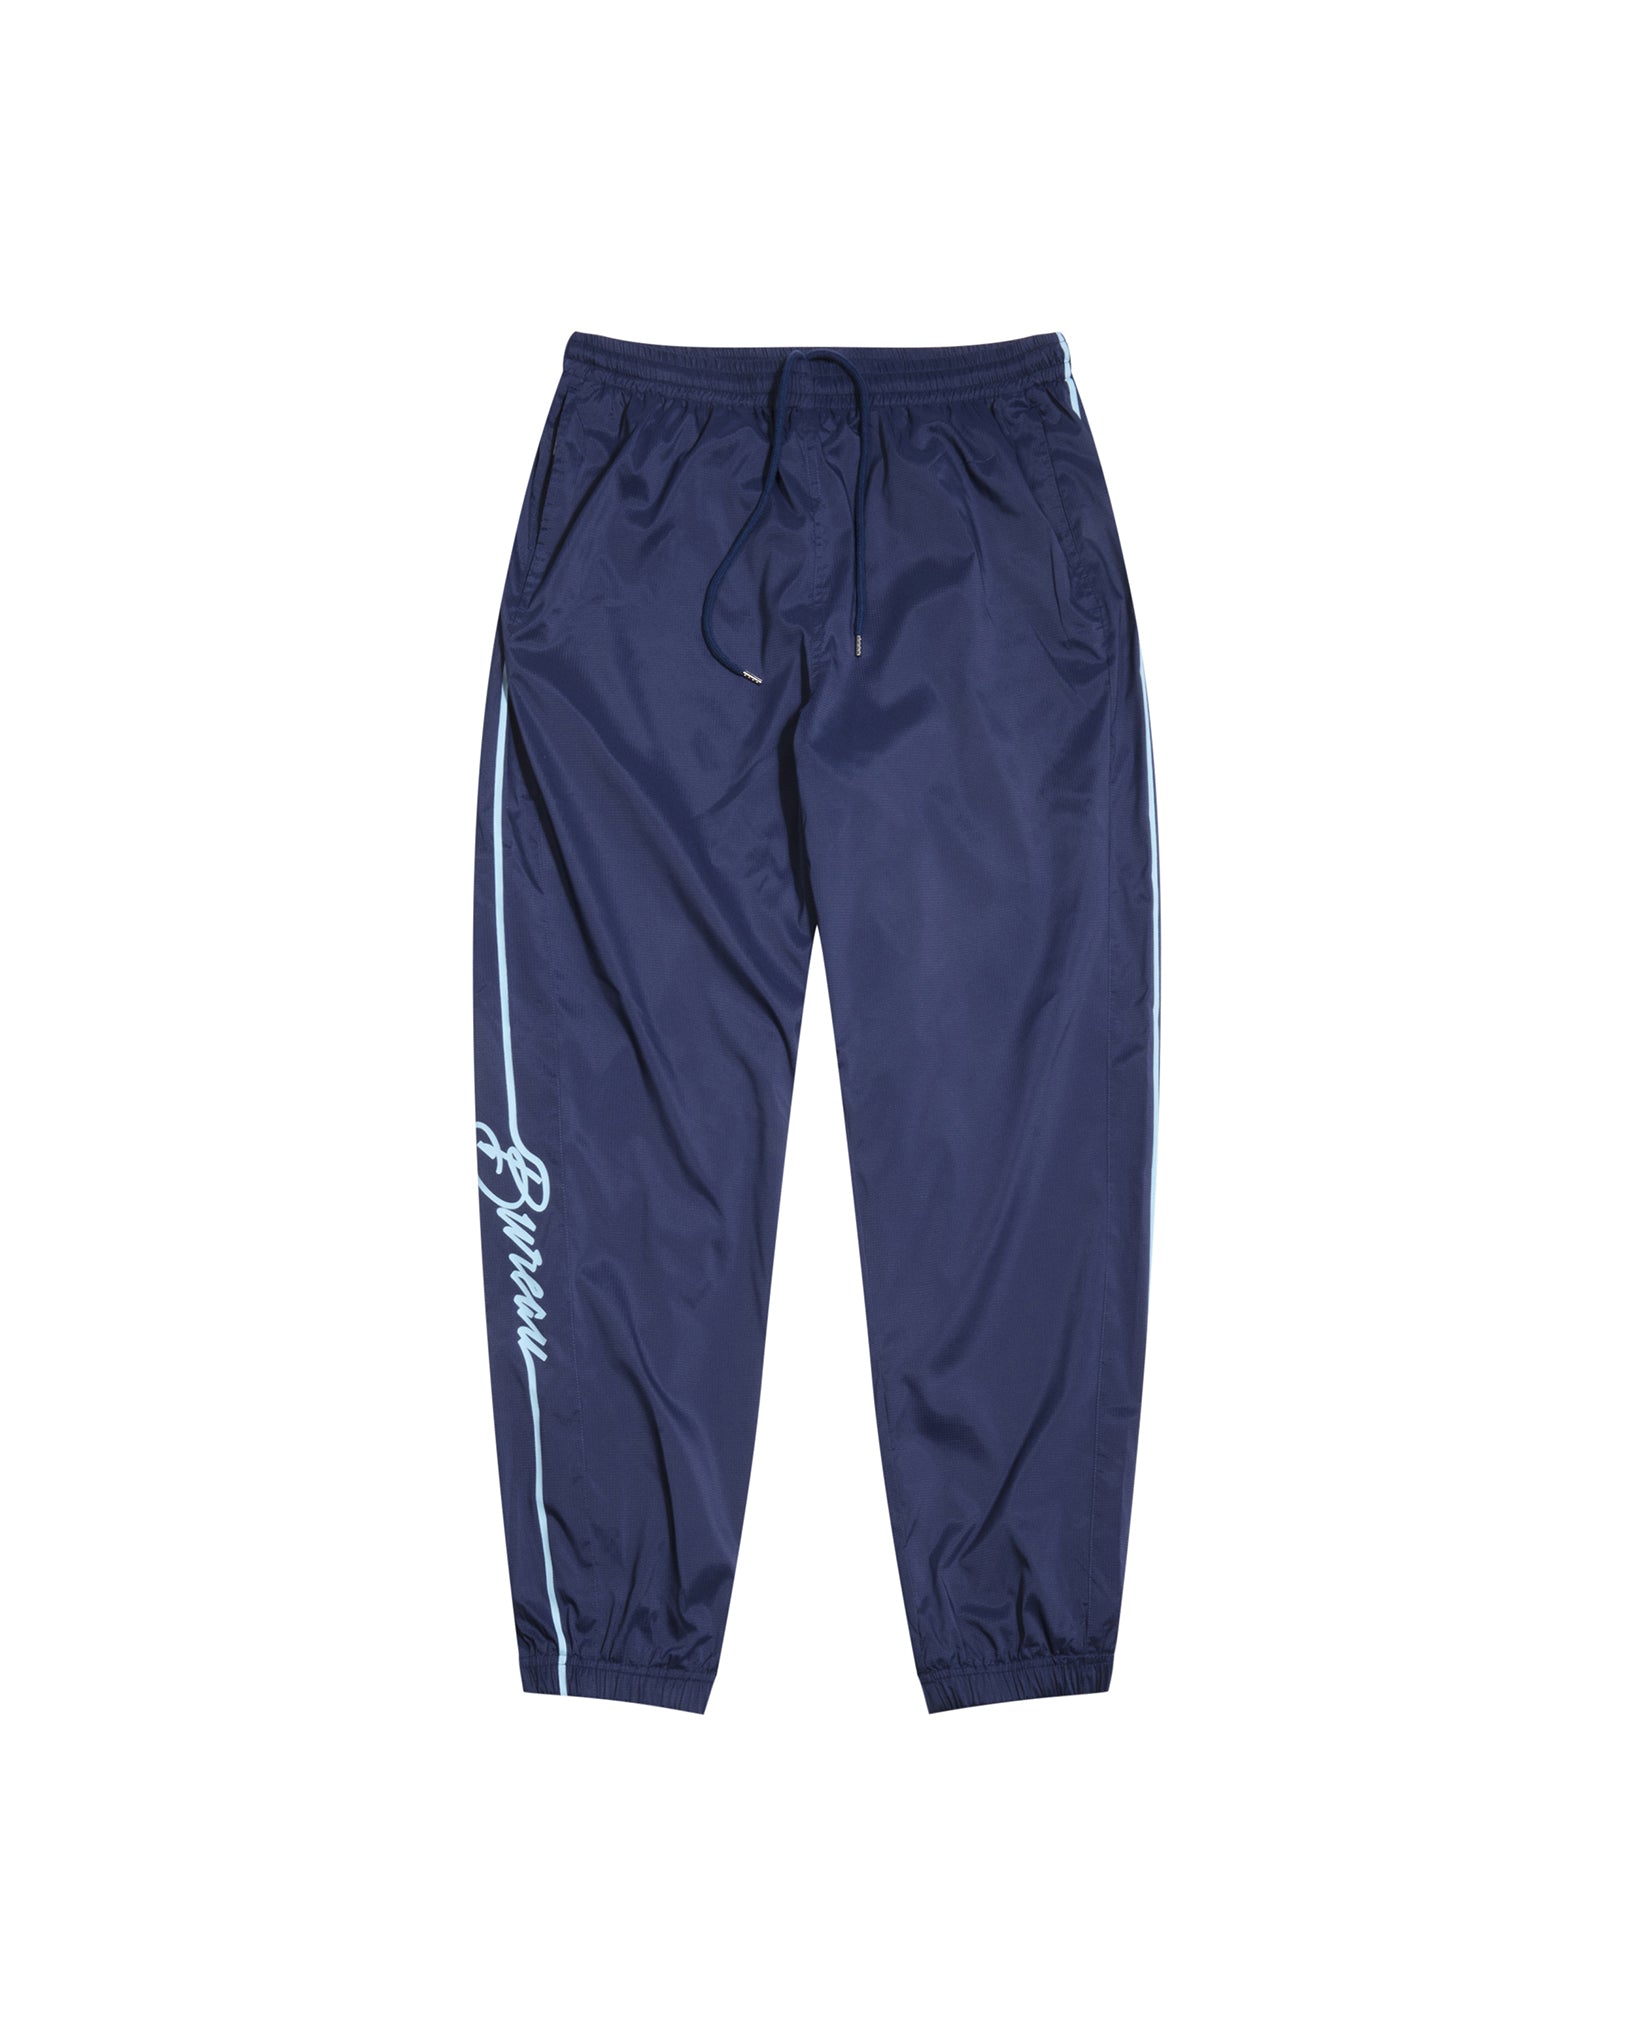 Navy Blue Relaxed Fit Men's Track Pants